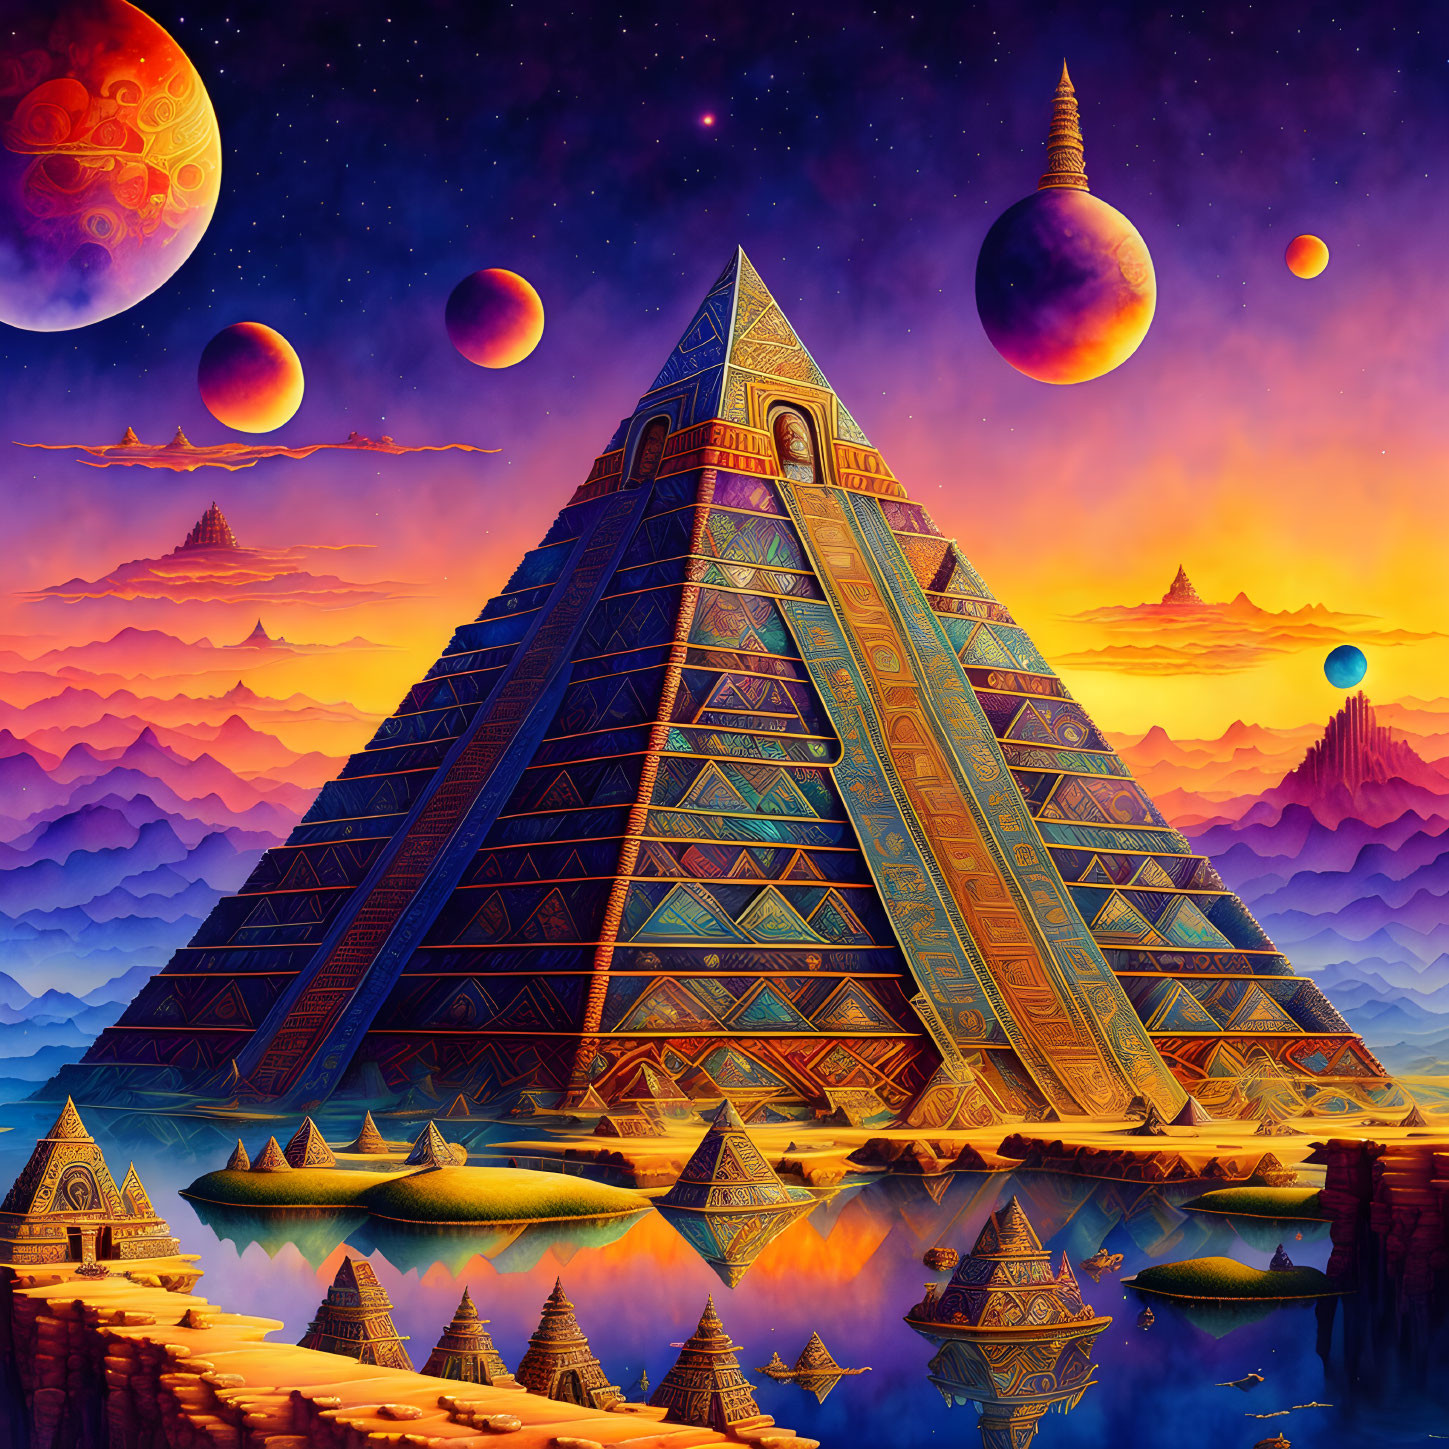 Colorful Fantasy Landscape with Pyramid and Floating Islands